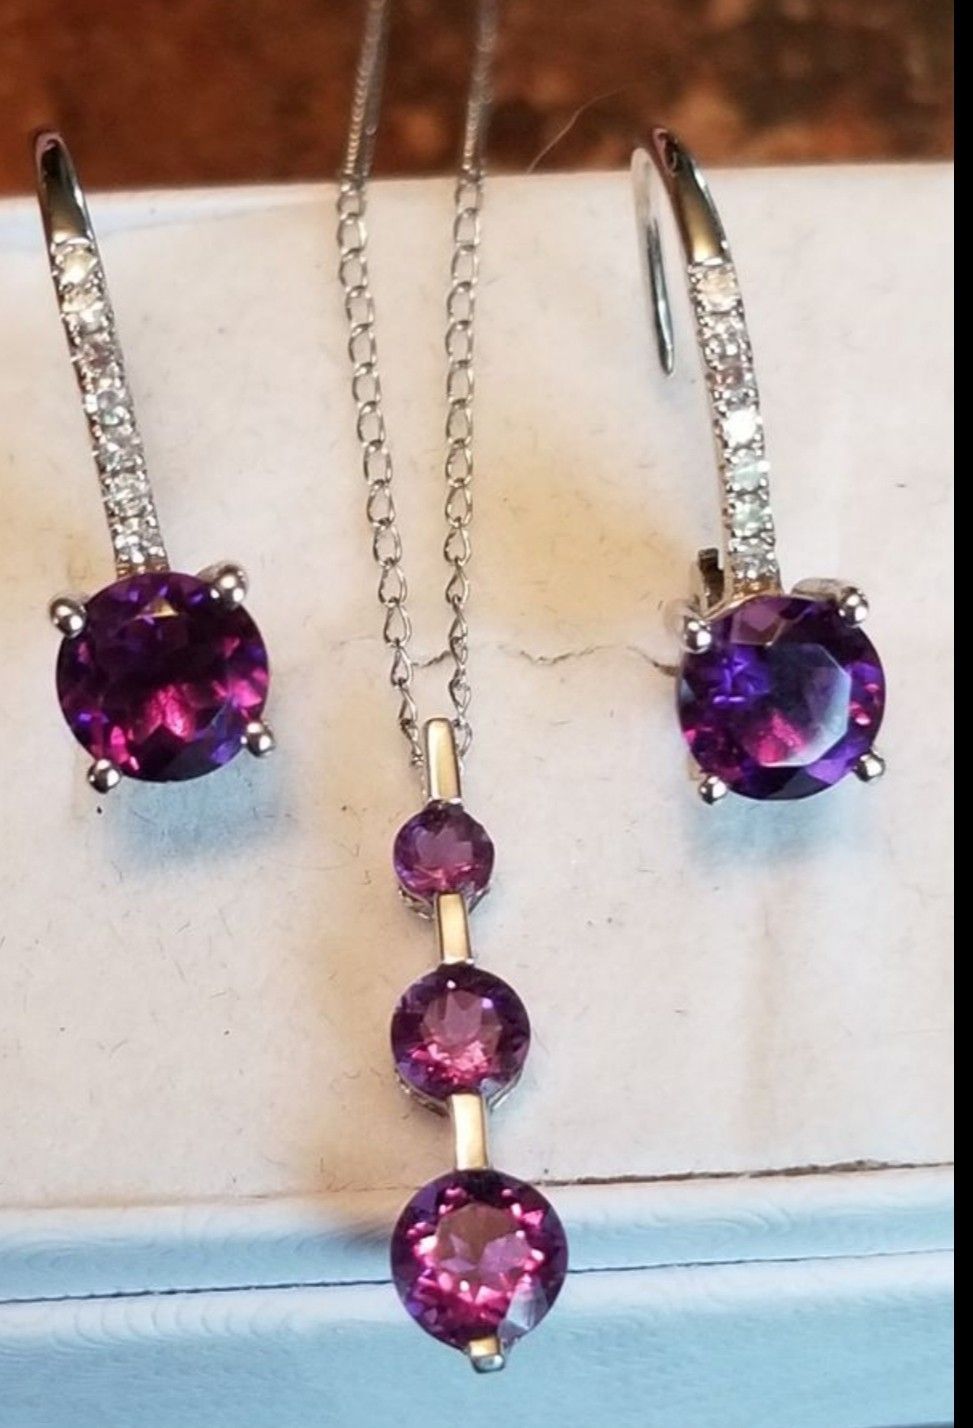 Stunning 14K white gold diamond and amethyst necklace and pierced earring gift set